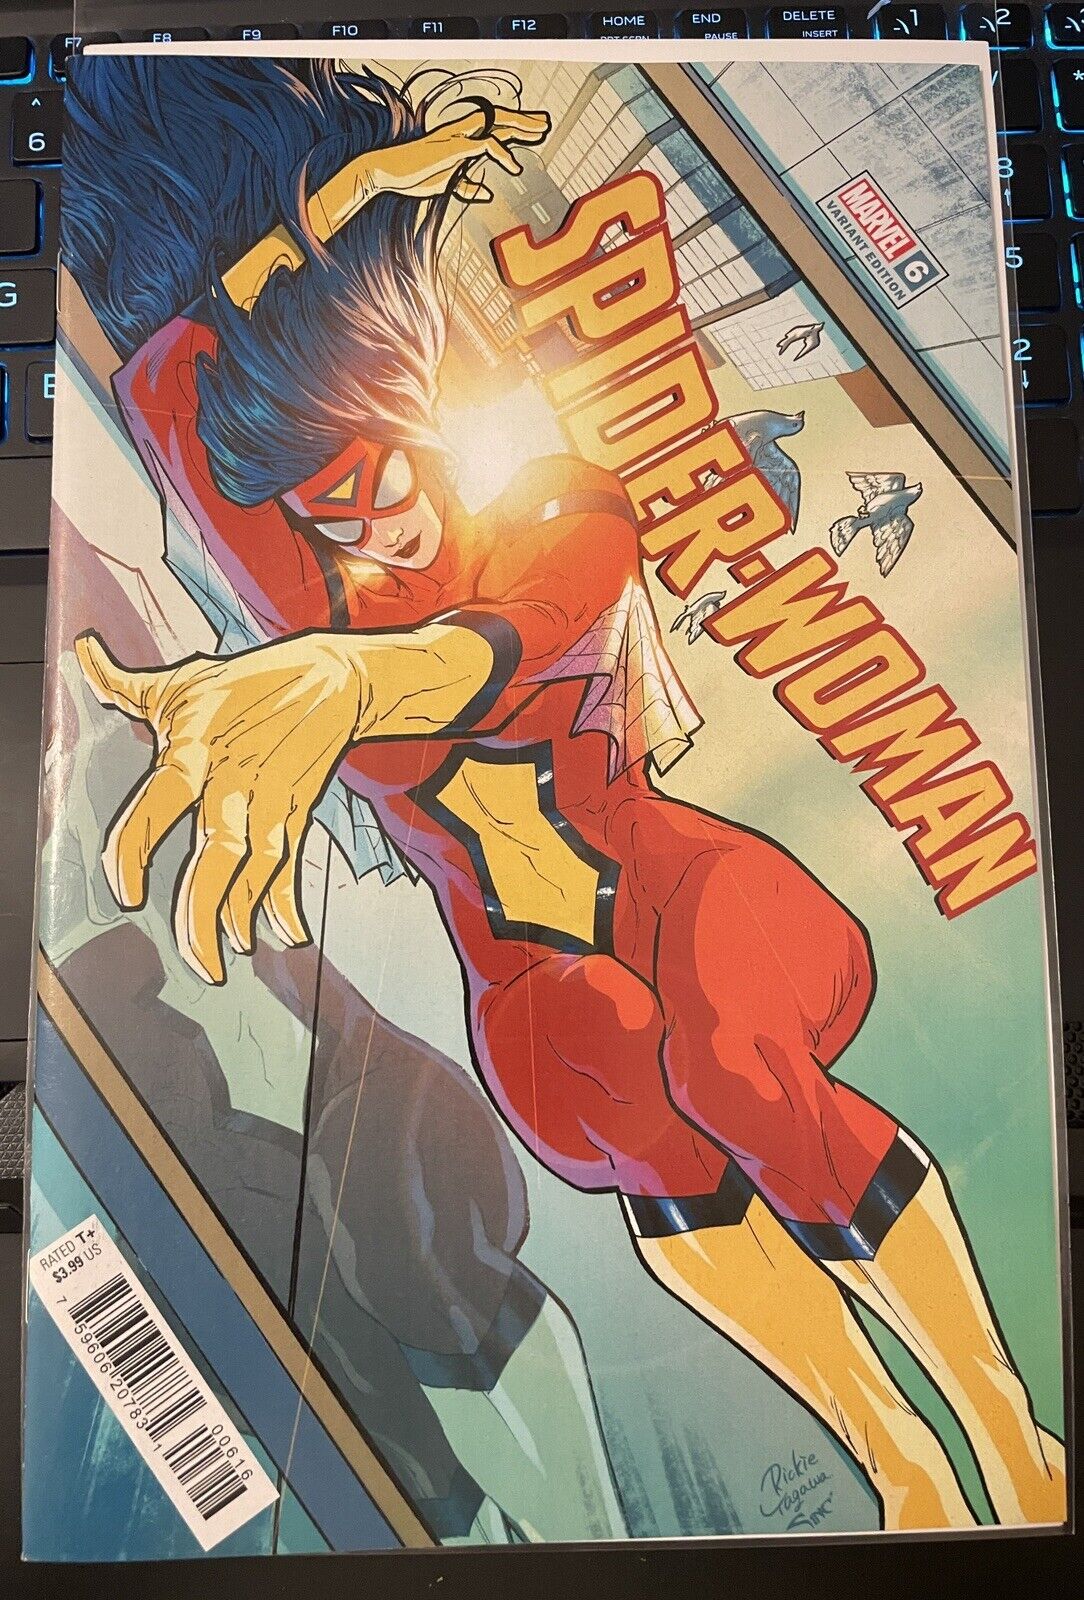 SPIDER-WOMAN #6 RICKIE YAGAWA VARIANT 1:25 1ST MENTION THE ASSEMBLY